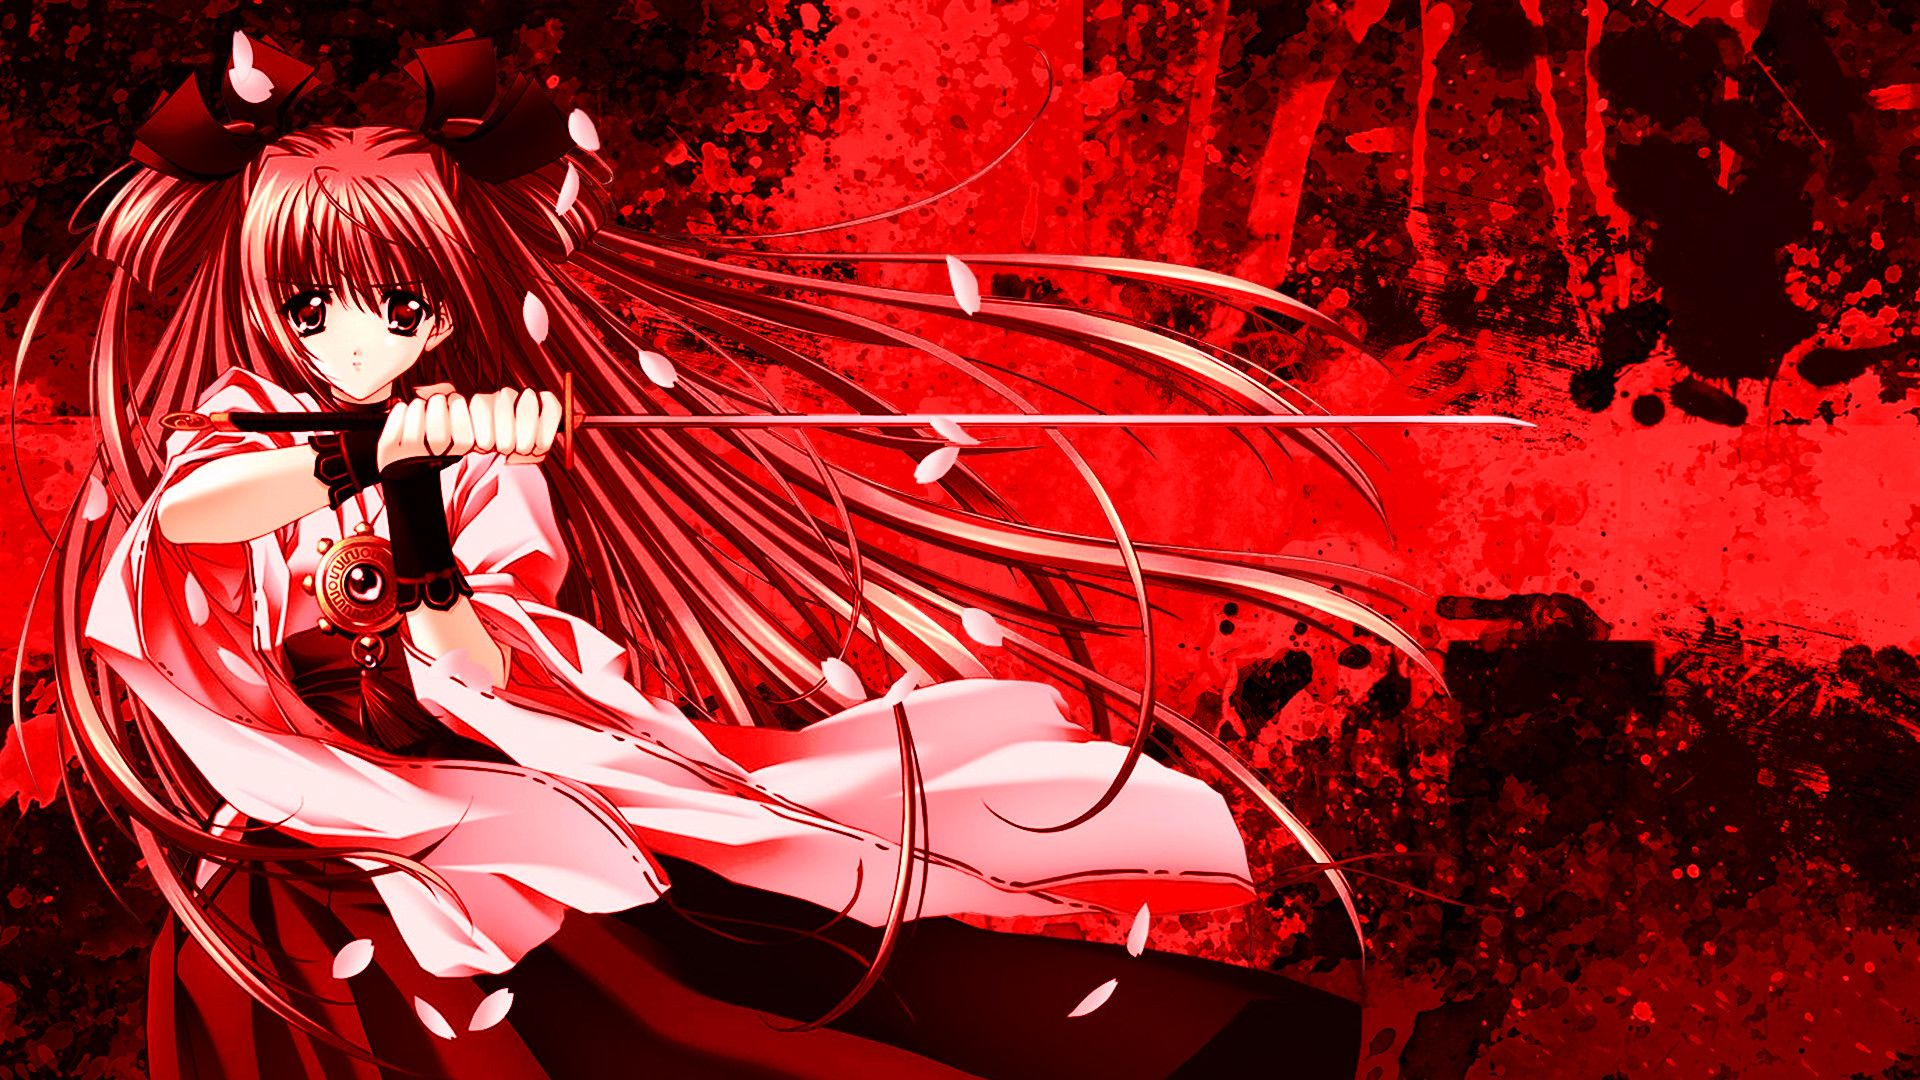 Wallpaper aesthetic red | Animes wallpapers, Anime, Personagens de anime